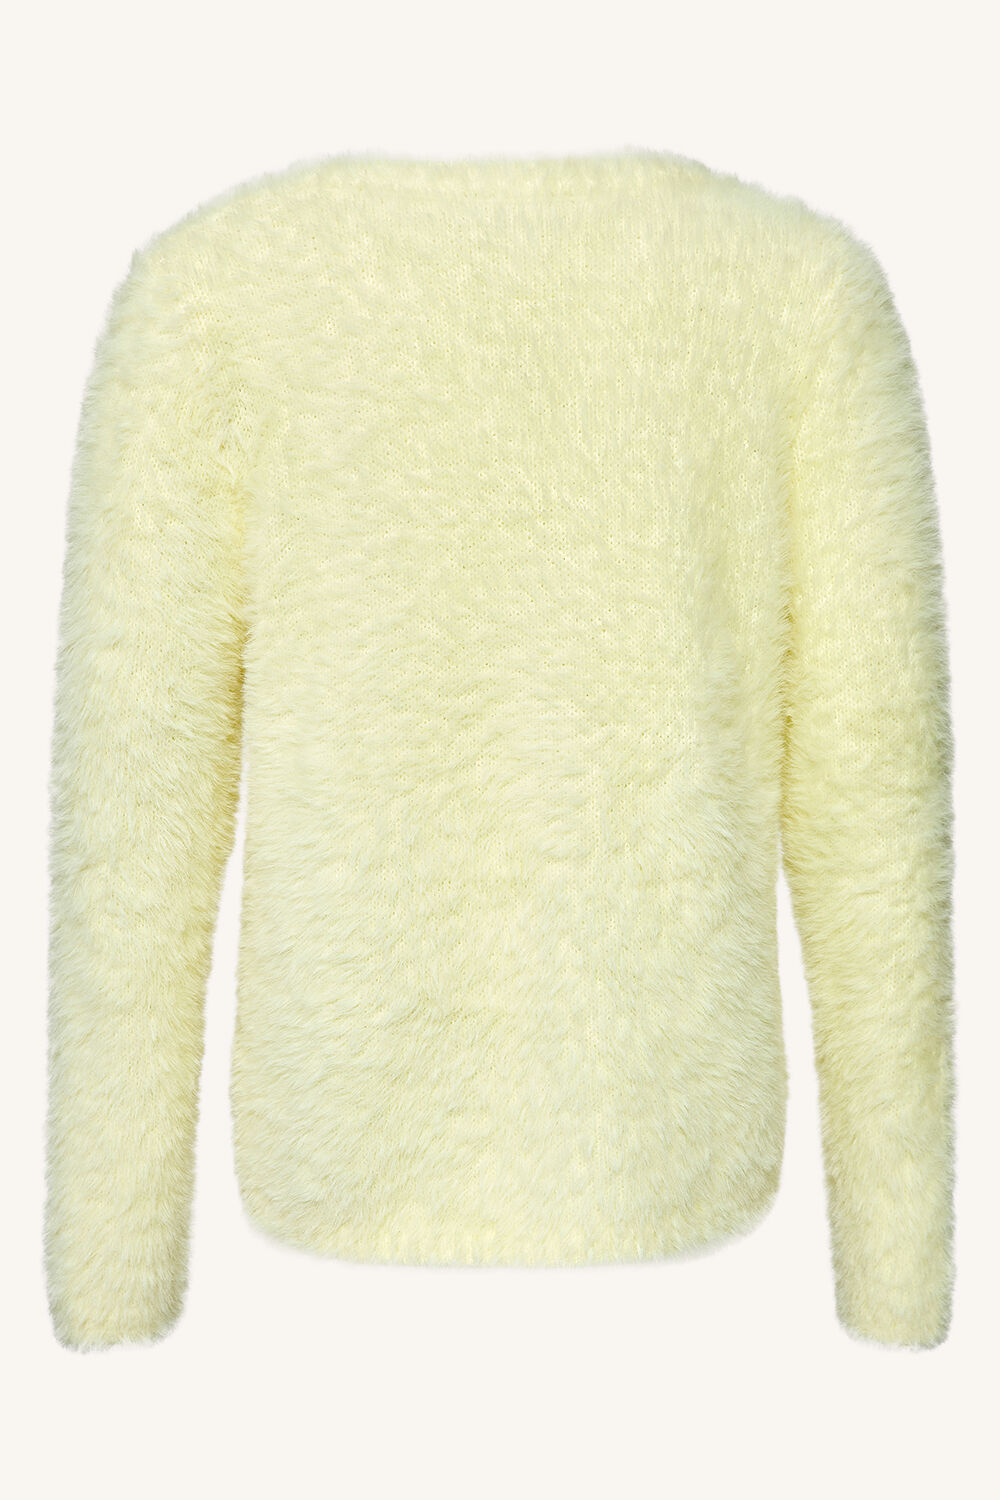 GIRLS FLUFFY BUNNY JUMPER in colour TENDER YELLOW